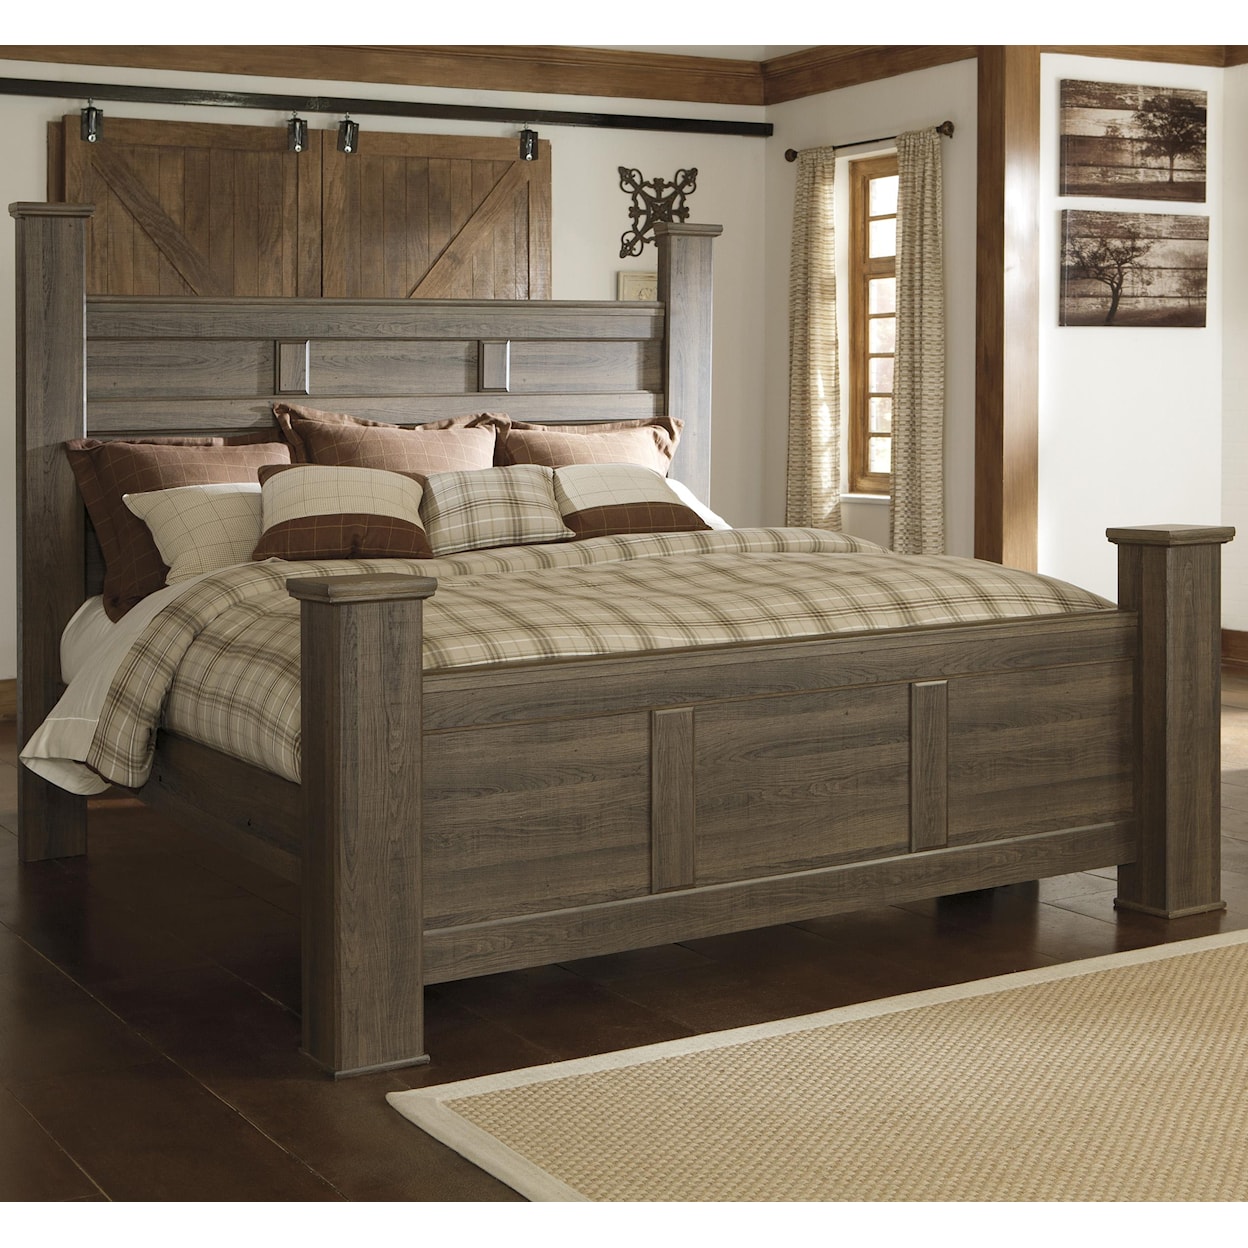 Signature Design by Ashley Juararo King Poster Bed